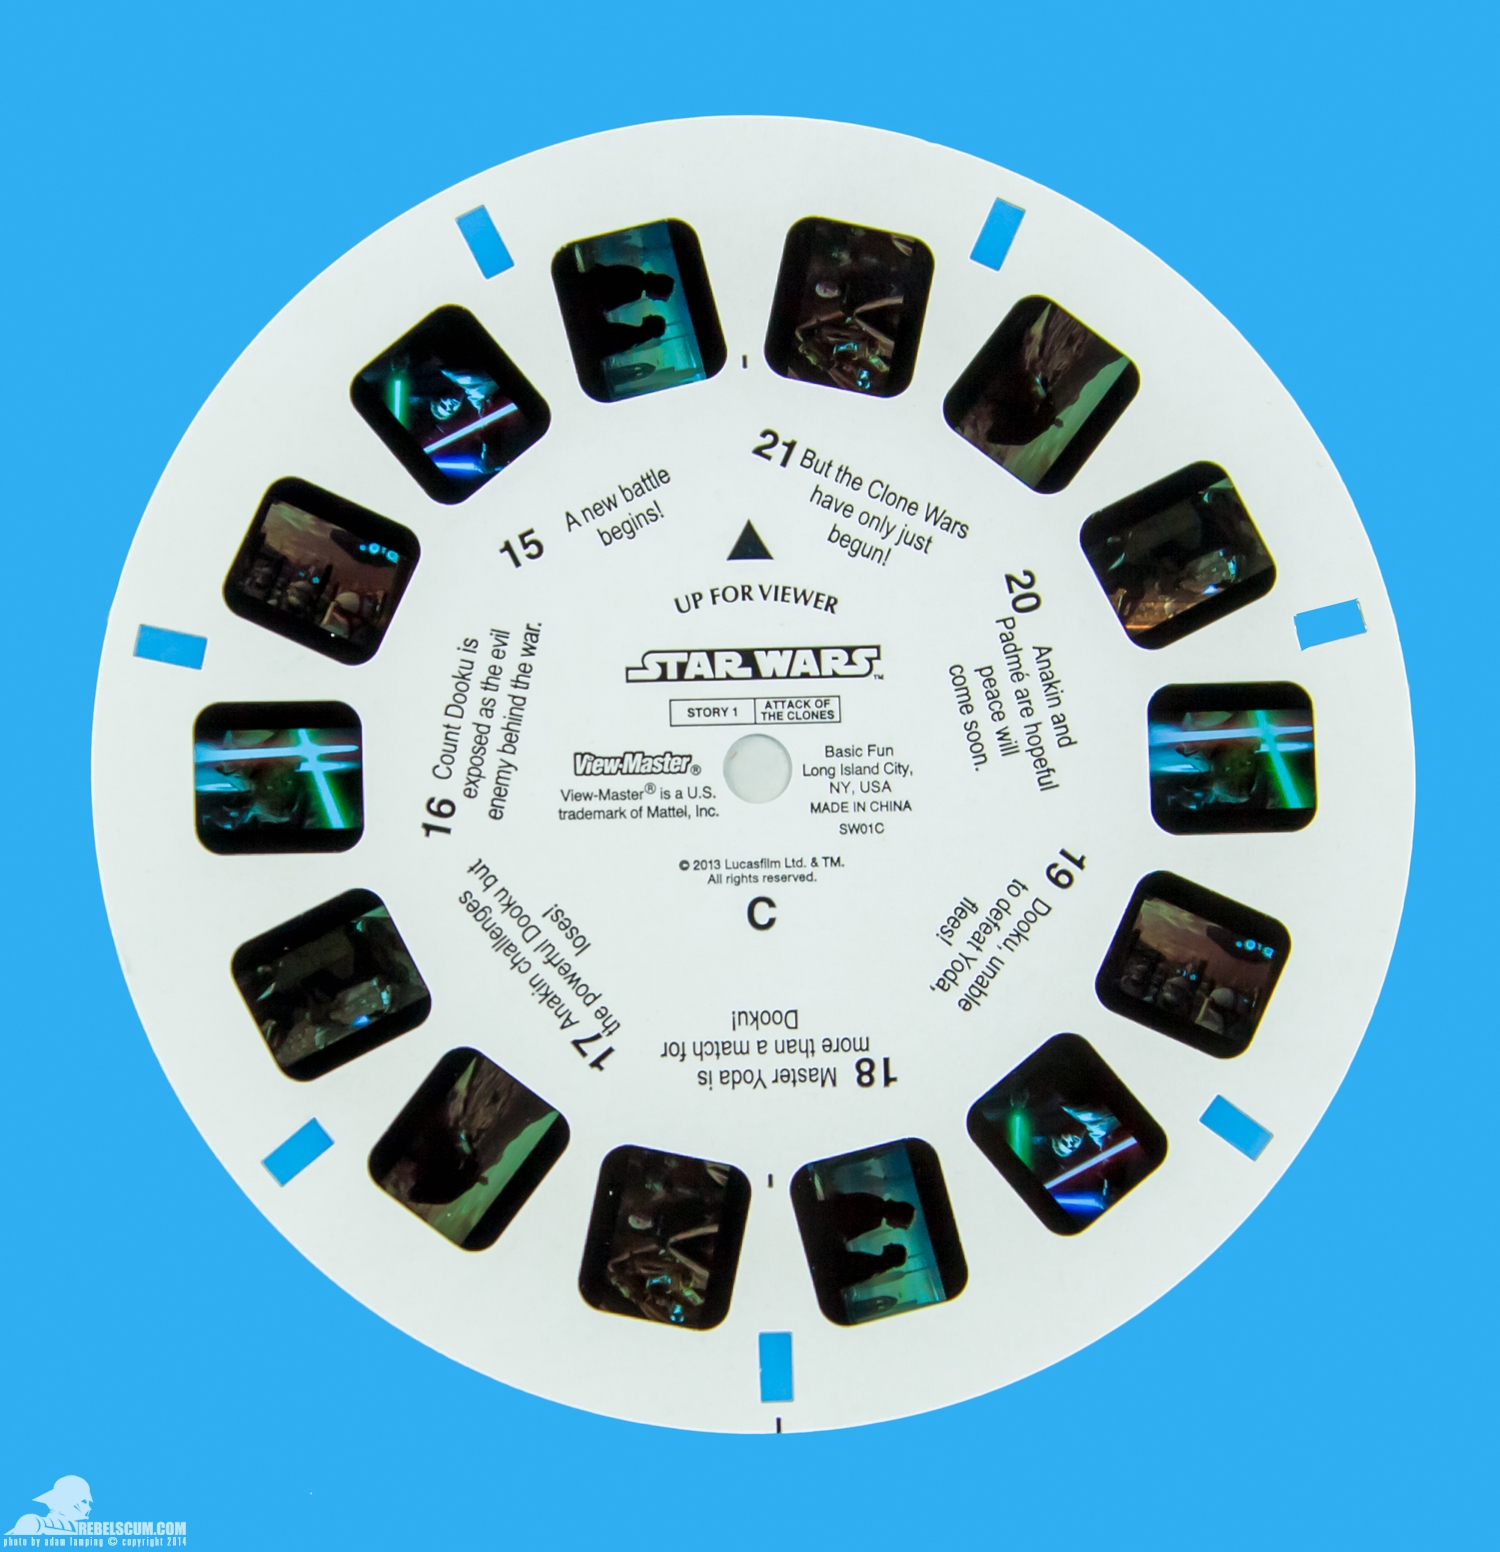 http://www.rebelscum.com/Veiw-Master/View-Master-Star-Wars-Attack-Of-The-Clones-3D-Reels/View-Master-Star-Wars-Attack-Of-The-Clones-3D-Reels-006.jpg